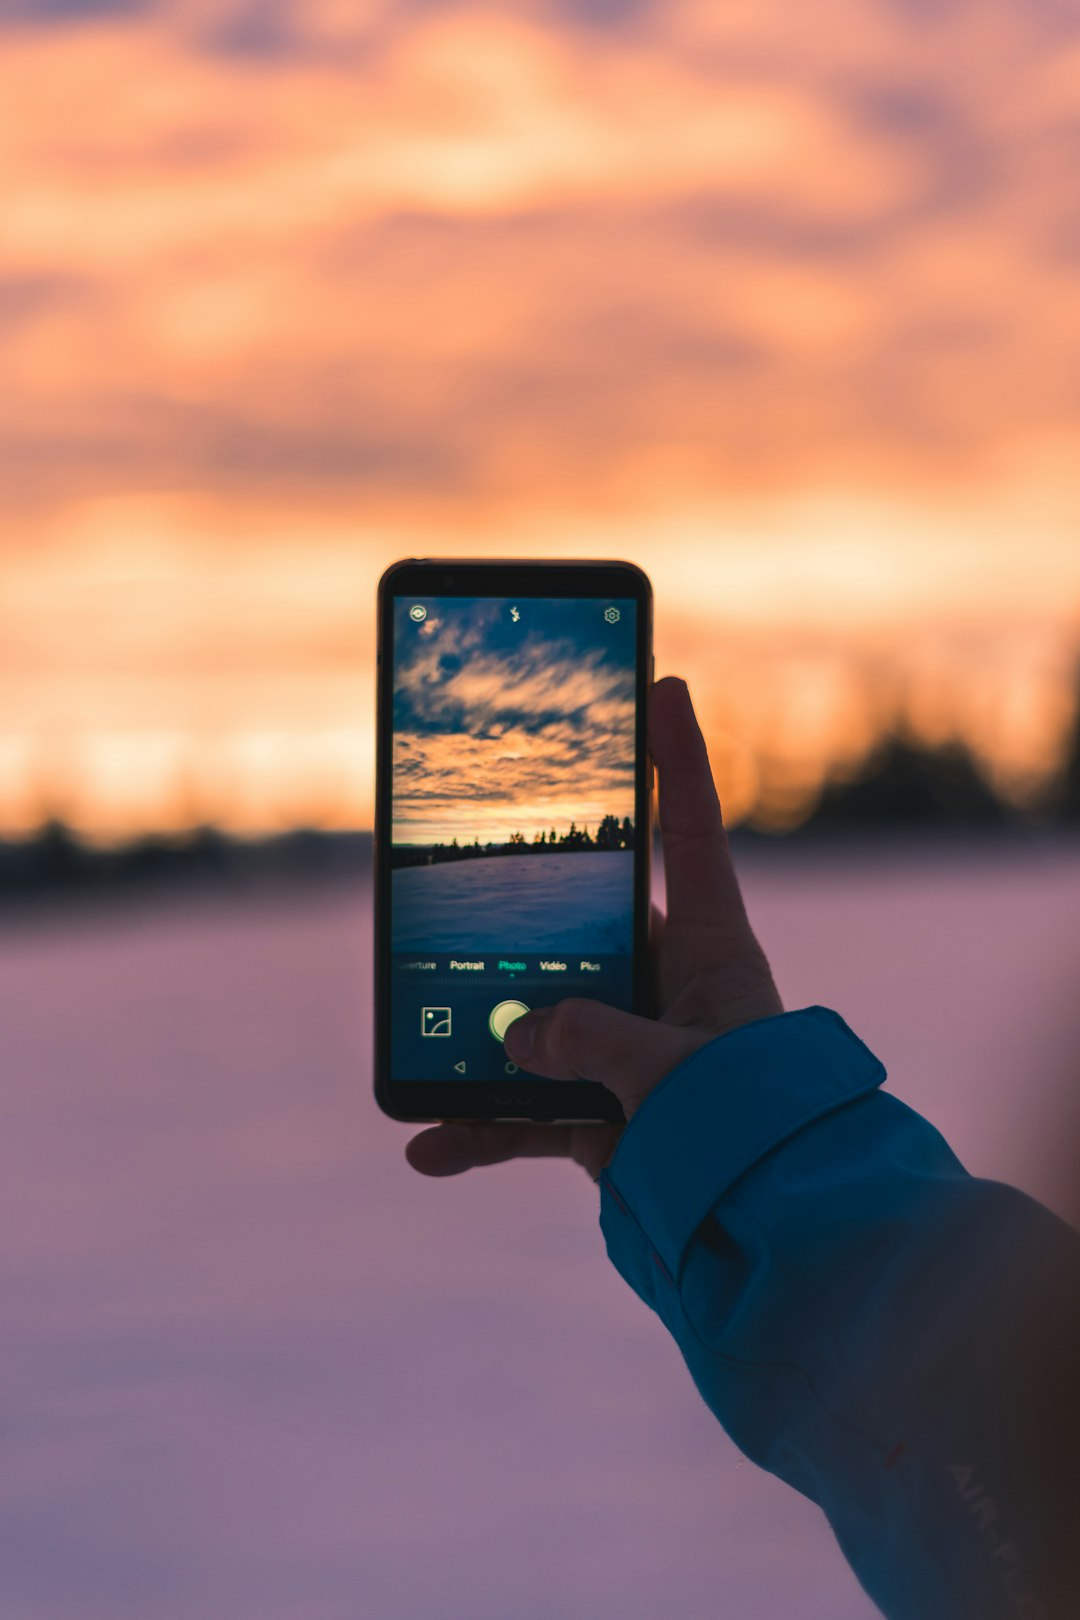 person holding black smartphone taking photo of sunset